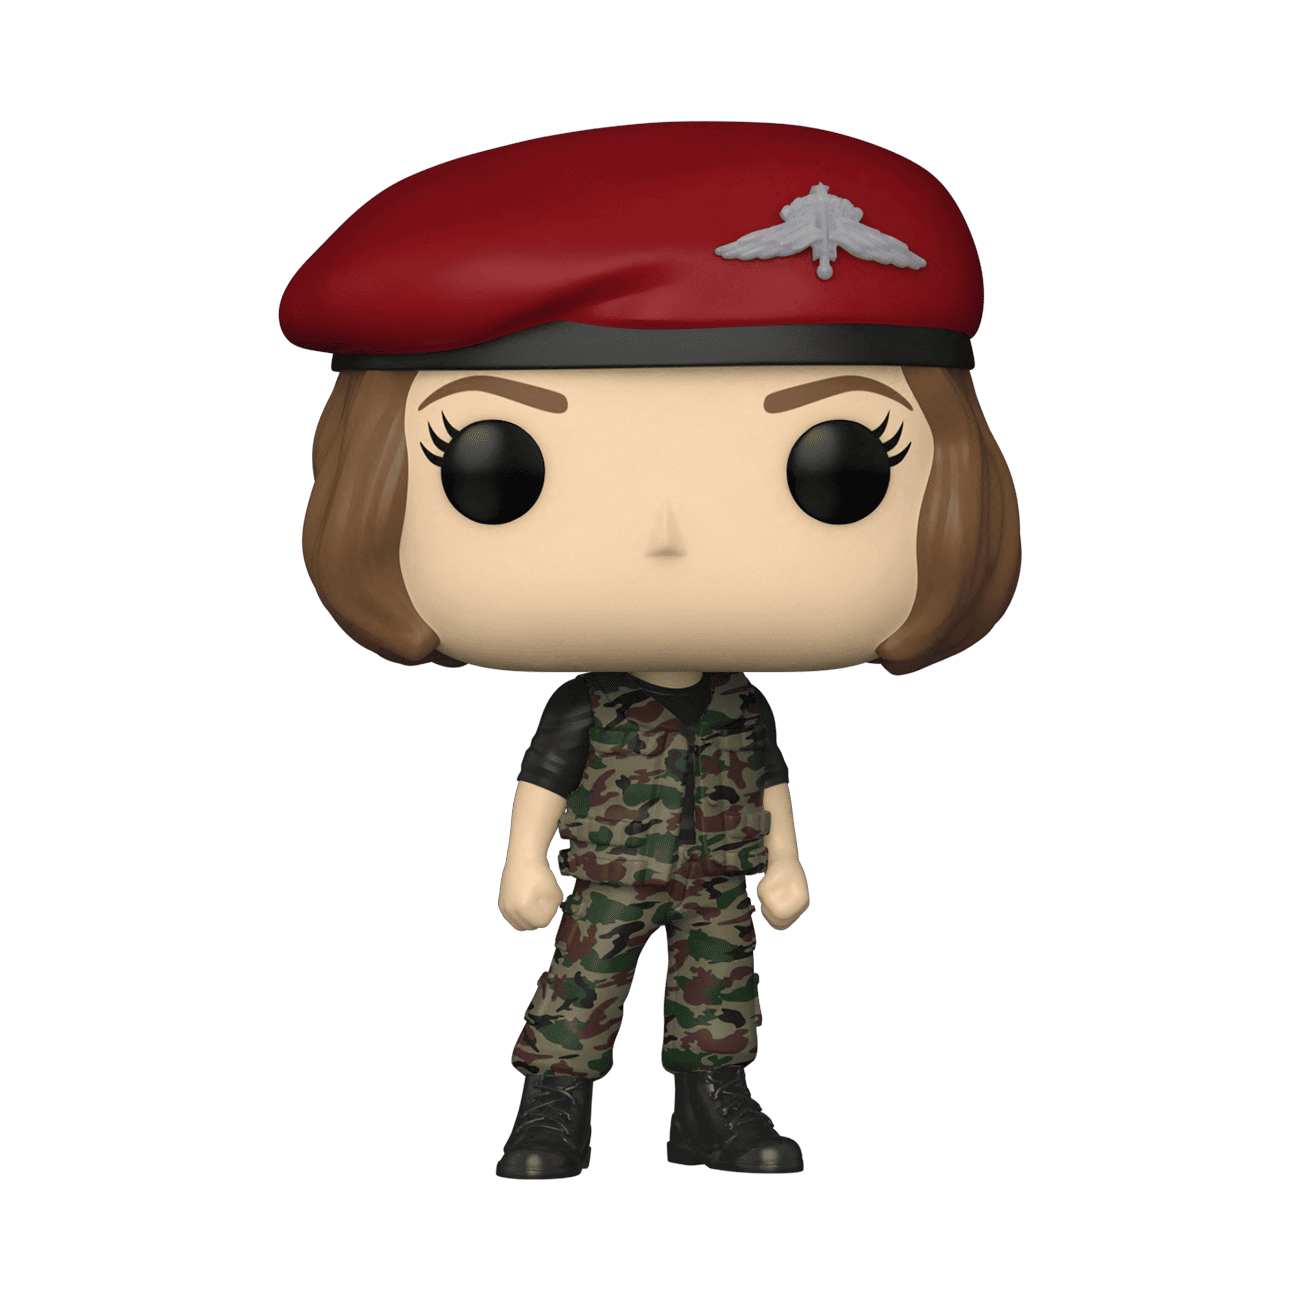 Buy Pop! Robin in Hunter Outfit at Funko.